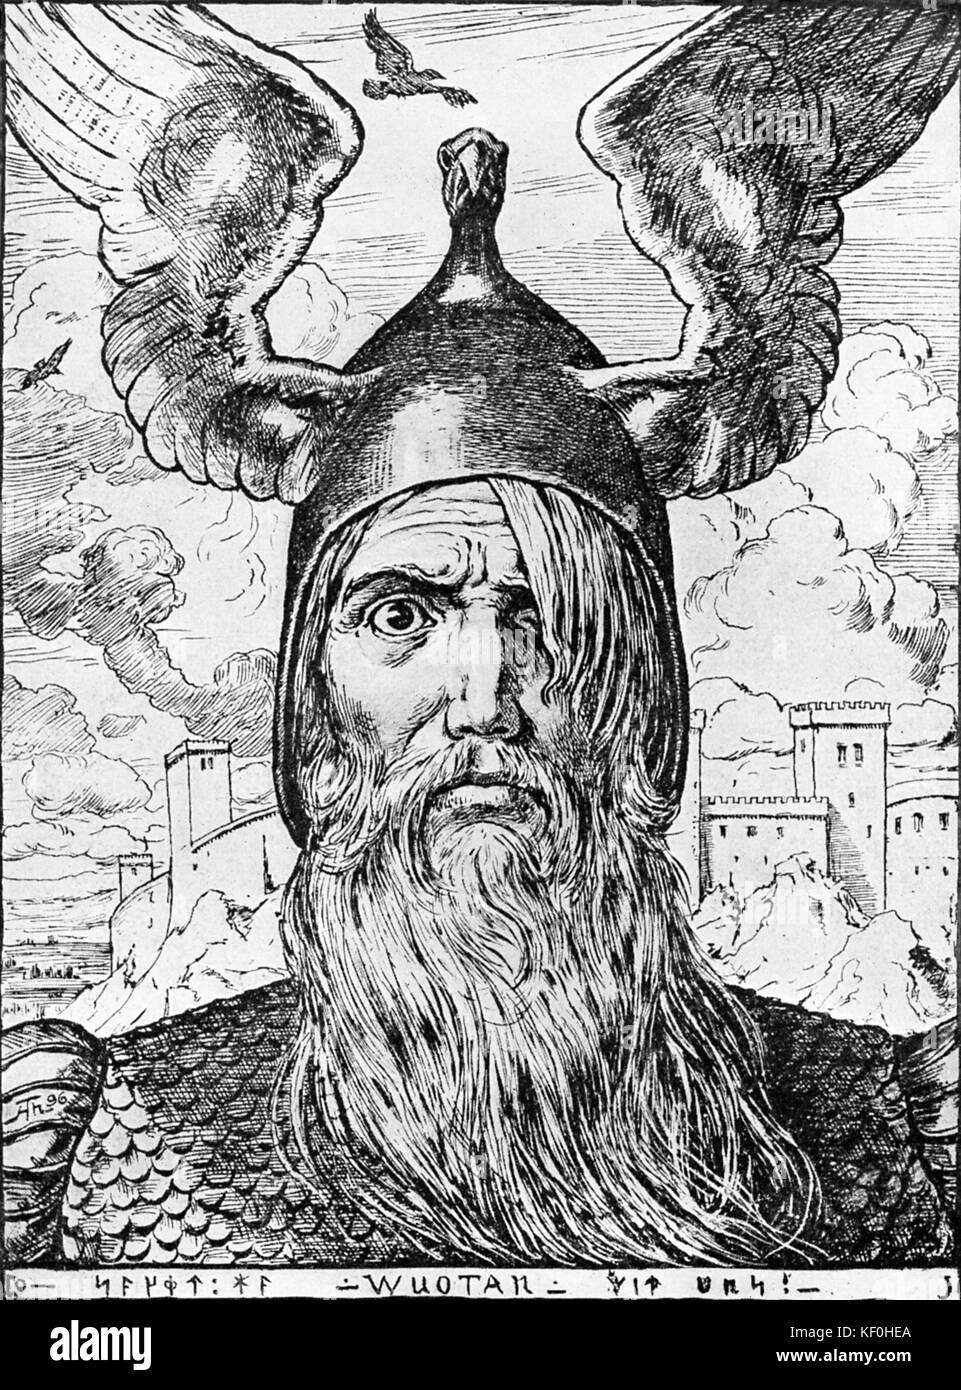 Wotan, king of the  Germanic pagan gods and key character in Richard Wagner 's 'Ring Cycle'. From Breitkopd and Härtel 's 'Zeitgenössischen Kunstblättern'.   RW German composer & author, 22 May 1813 - 13 February 1883. Stock Photo